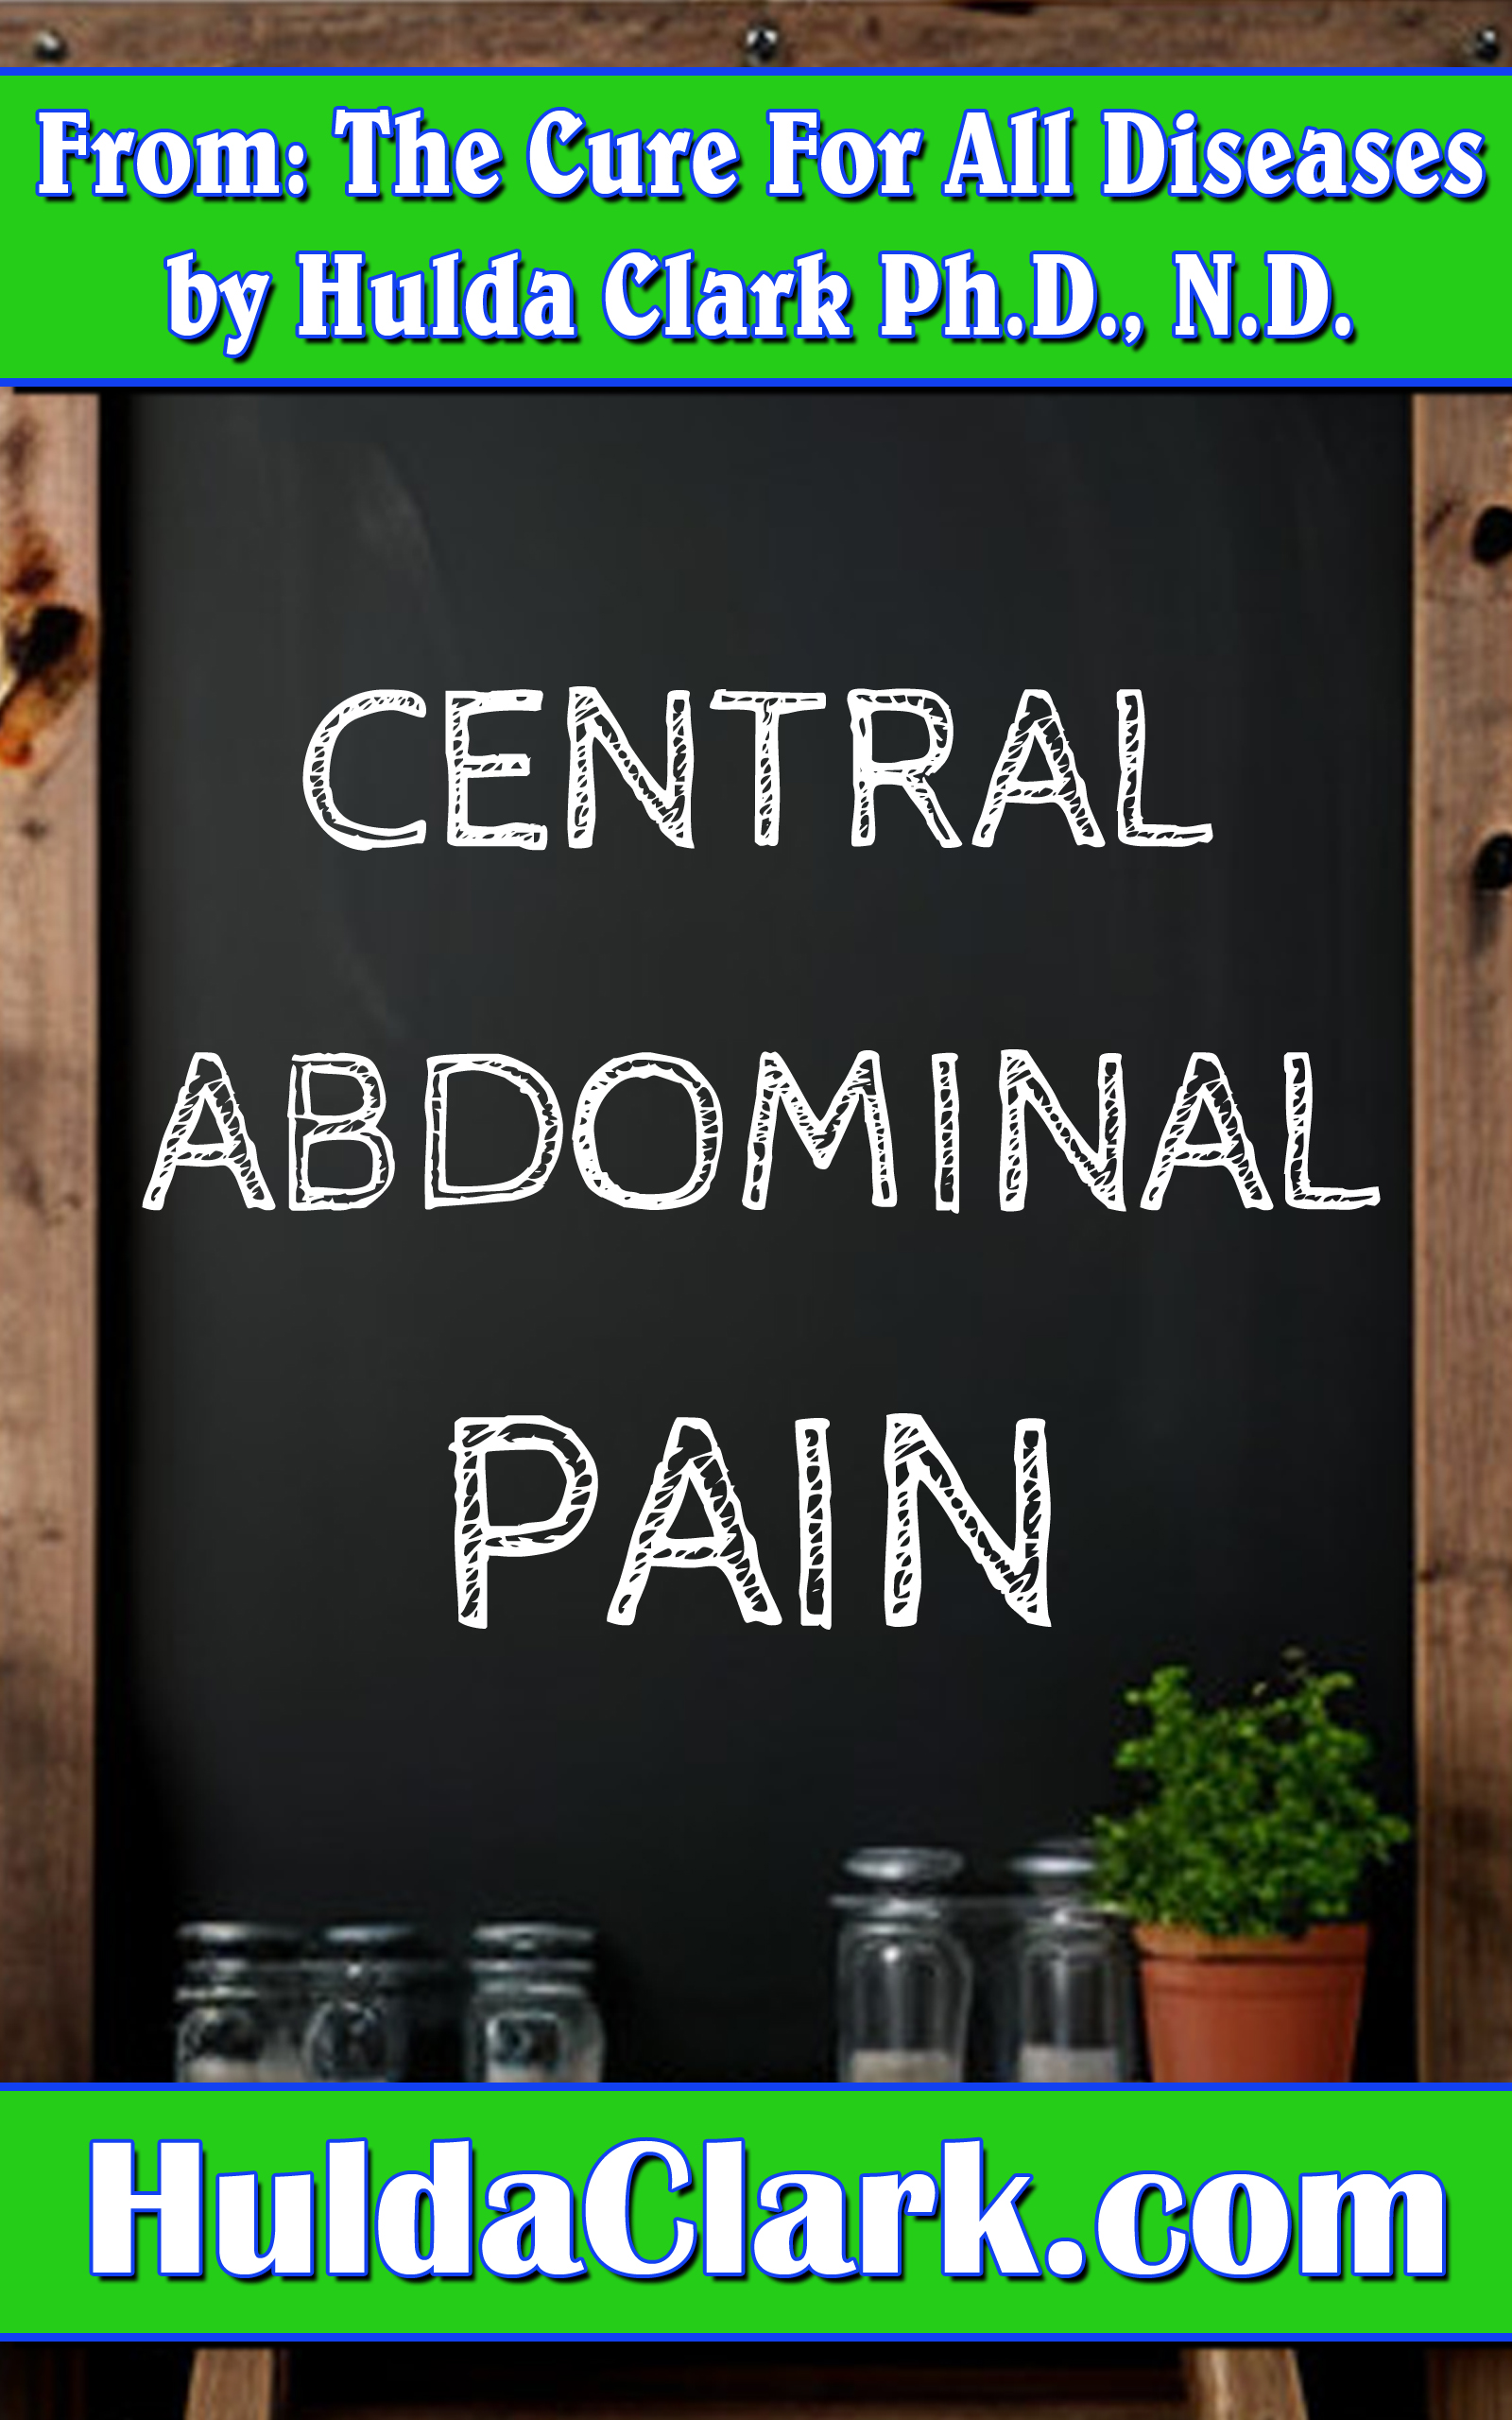 Central Abdominal Pain Ebook excerpt from The Cure for All Diseases by Hulda Clark